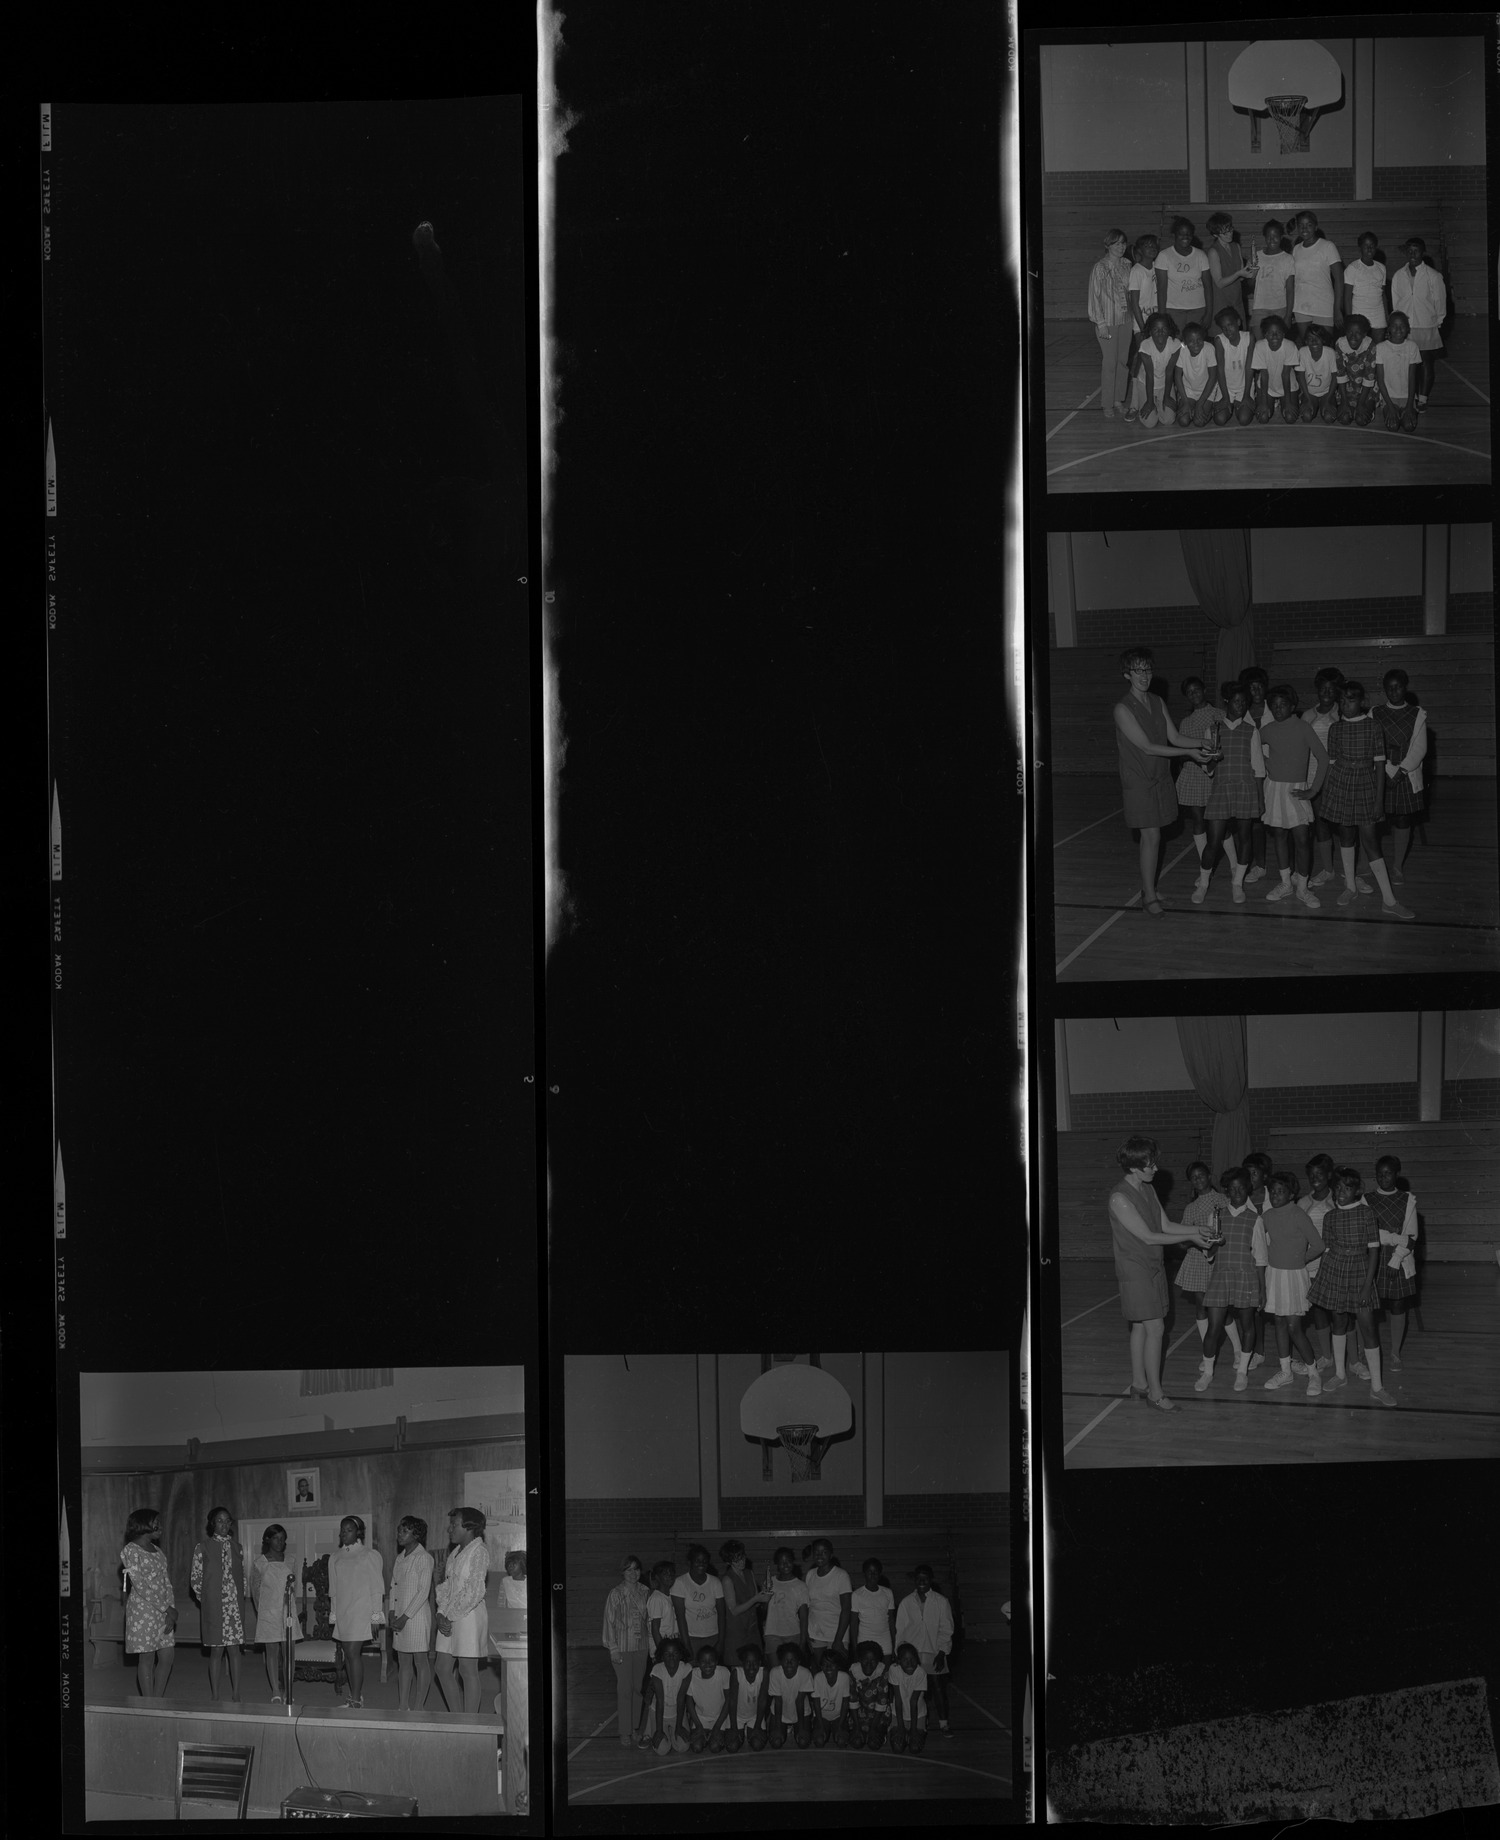 Set of negatives by Clinton Wright including Victory Baptist Choir, Love's Cocktail Lounge, Easter Program at Upperoom, and basketball tournament at Doolittle, 1970, page 1